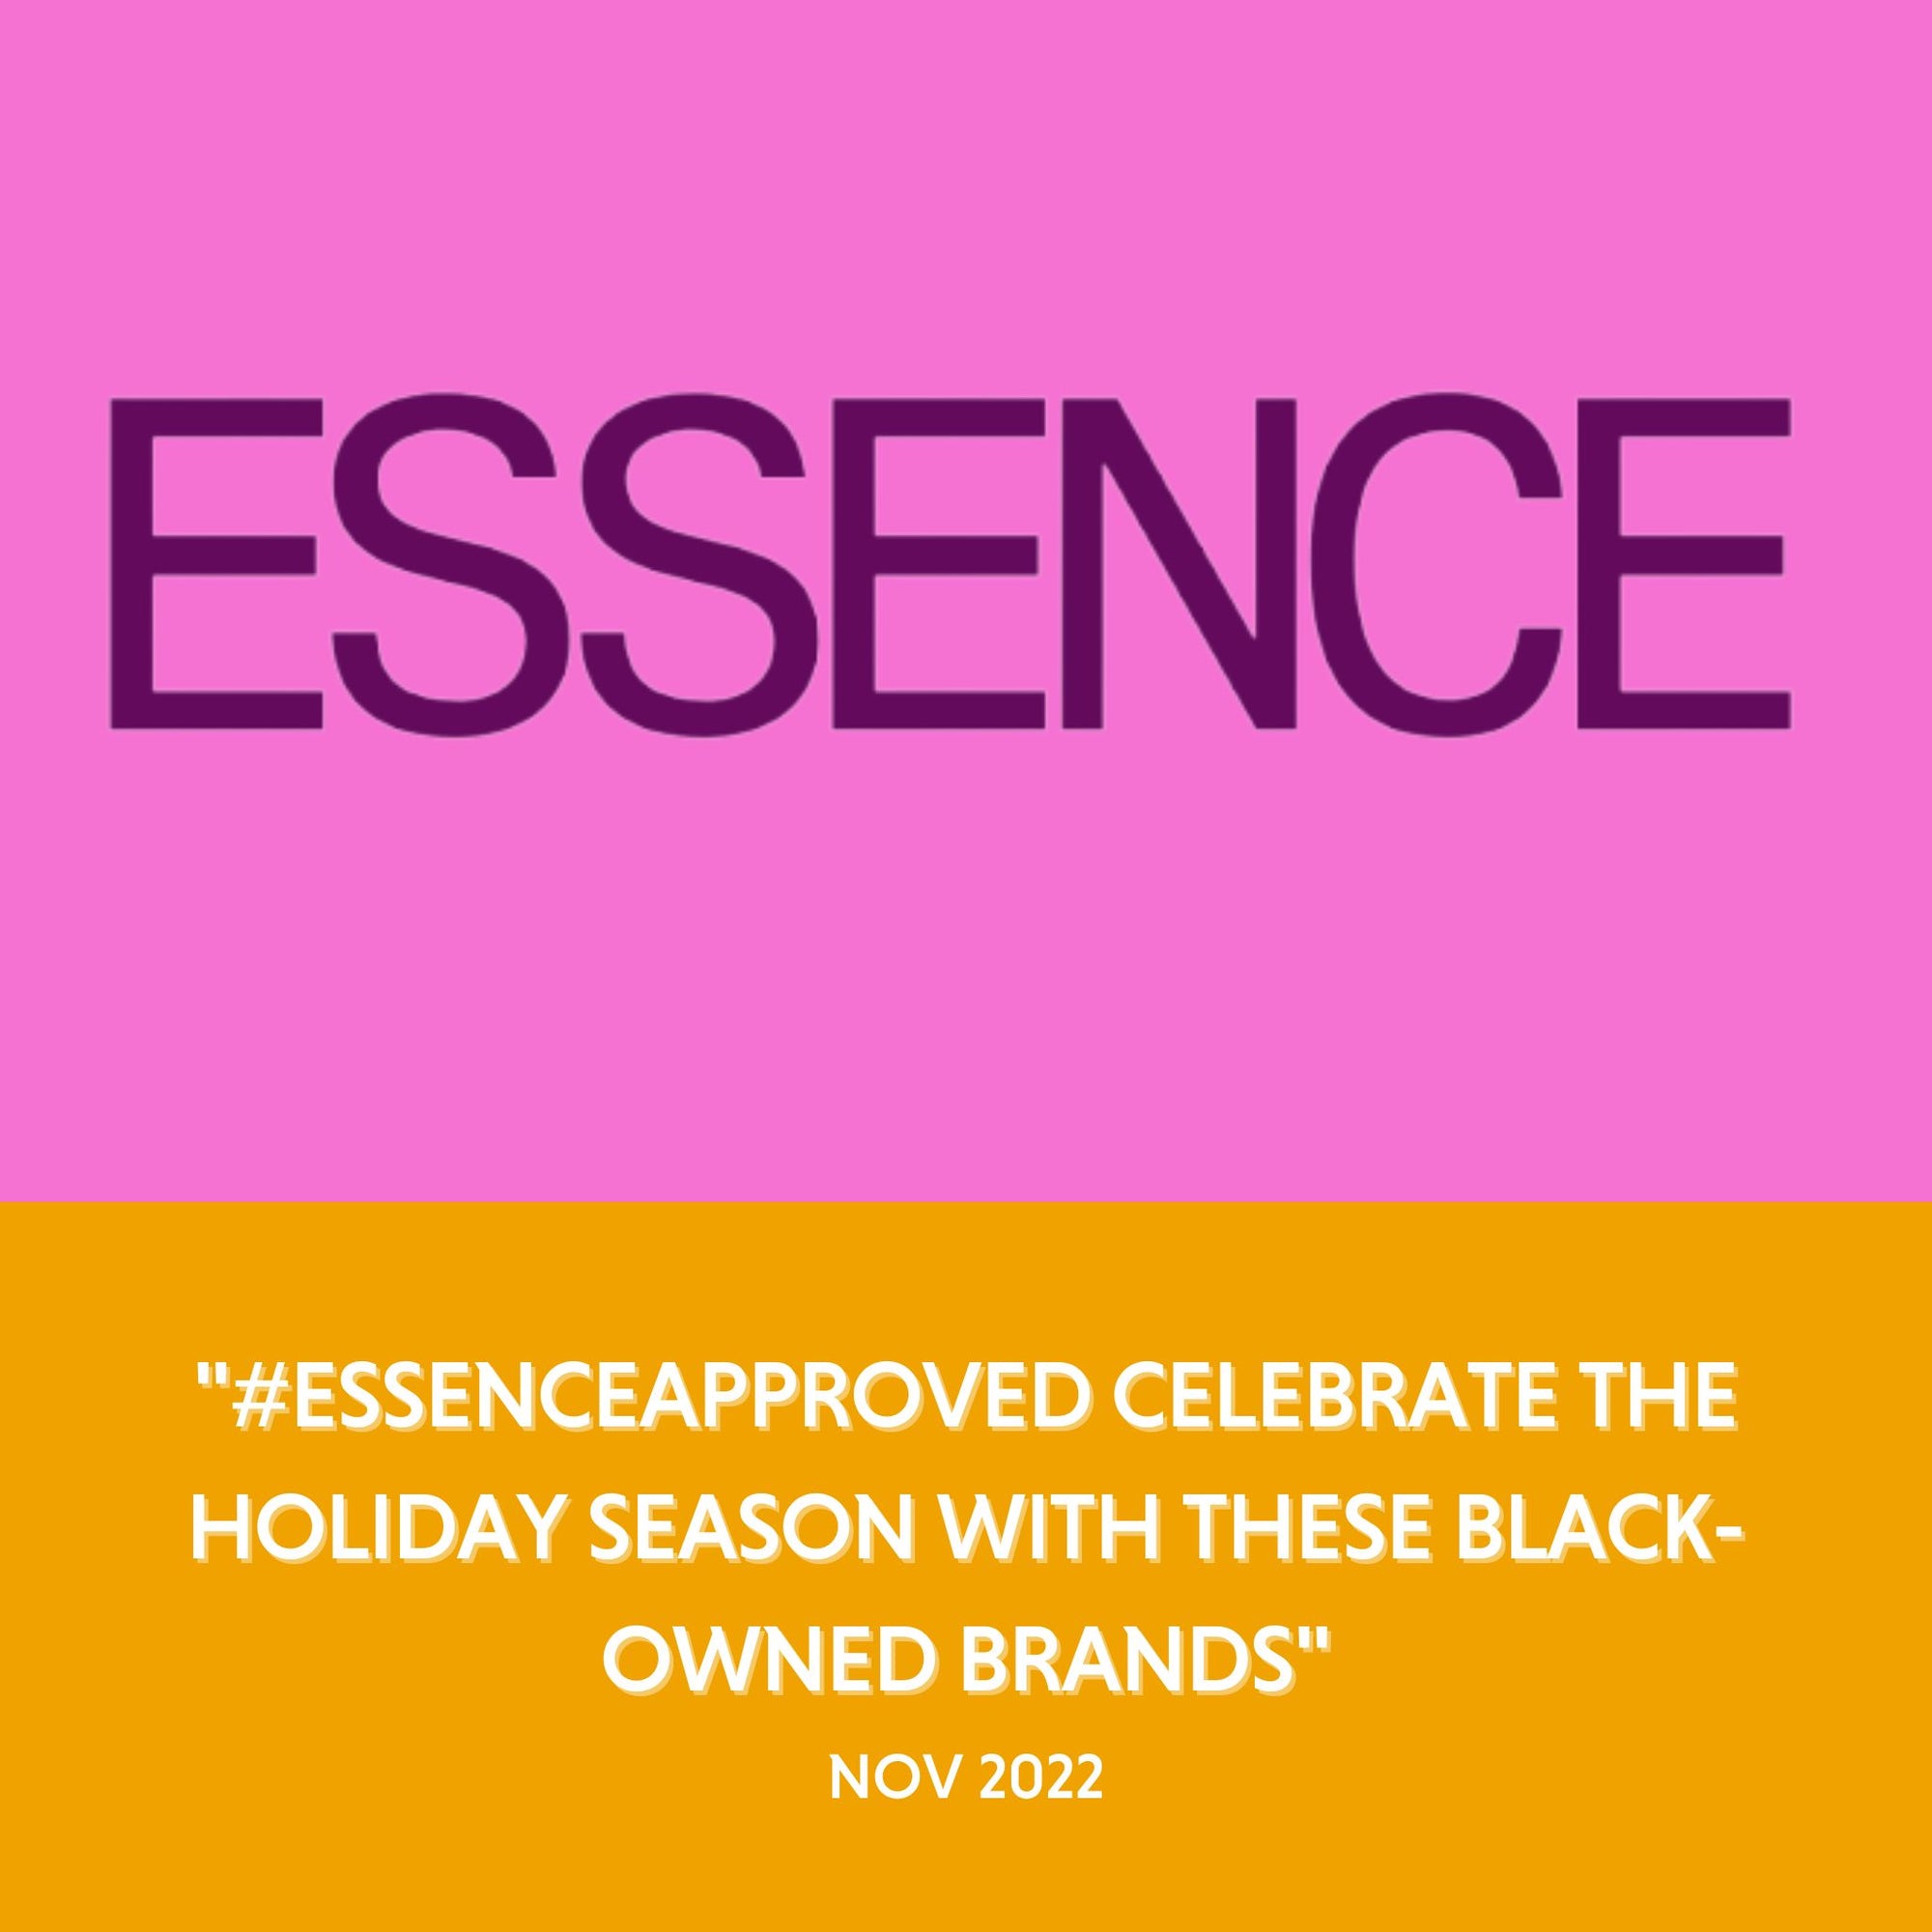 Essence - "#ESSENCEApproved Celebrate the Holiday Season with These Black-Owned Brands" - Nov 2022